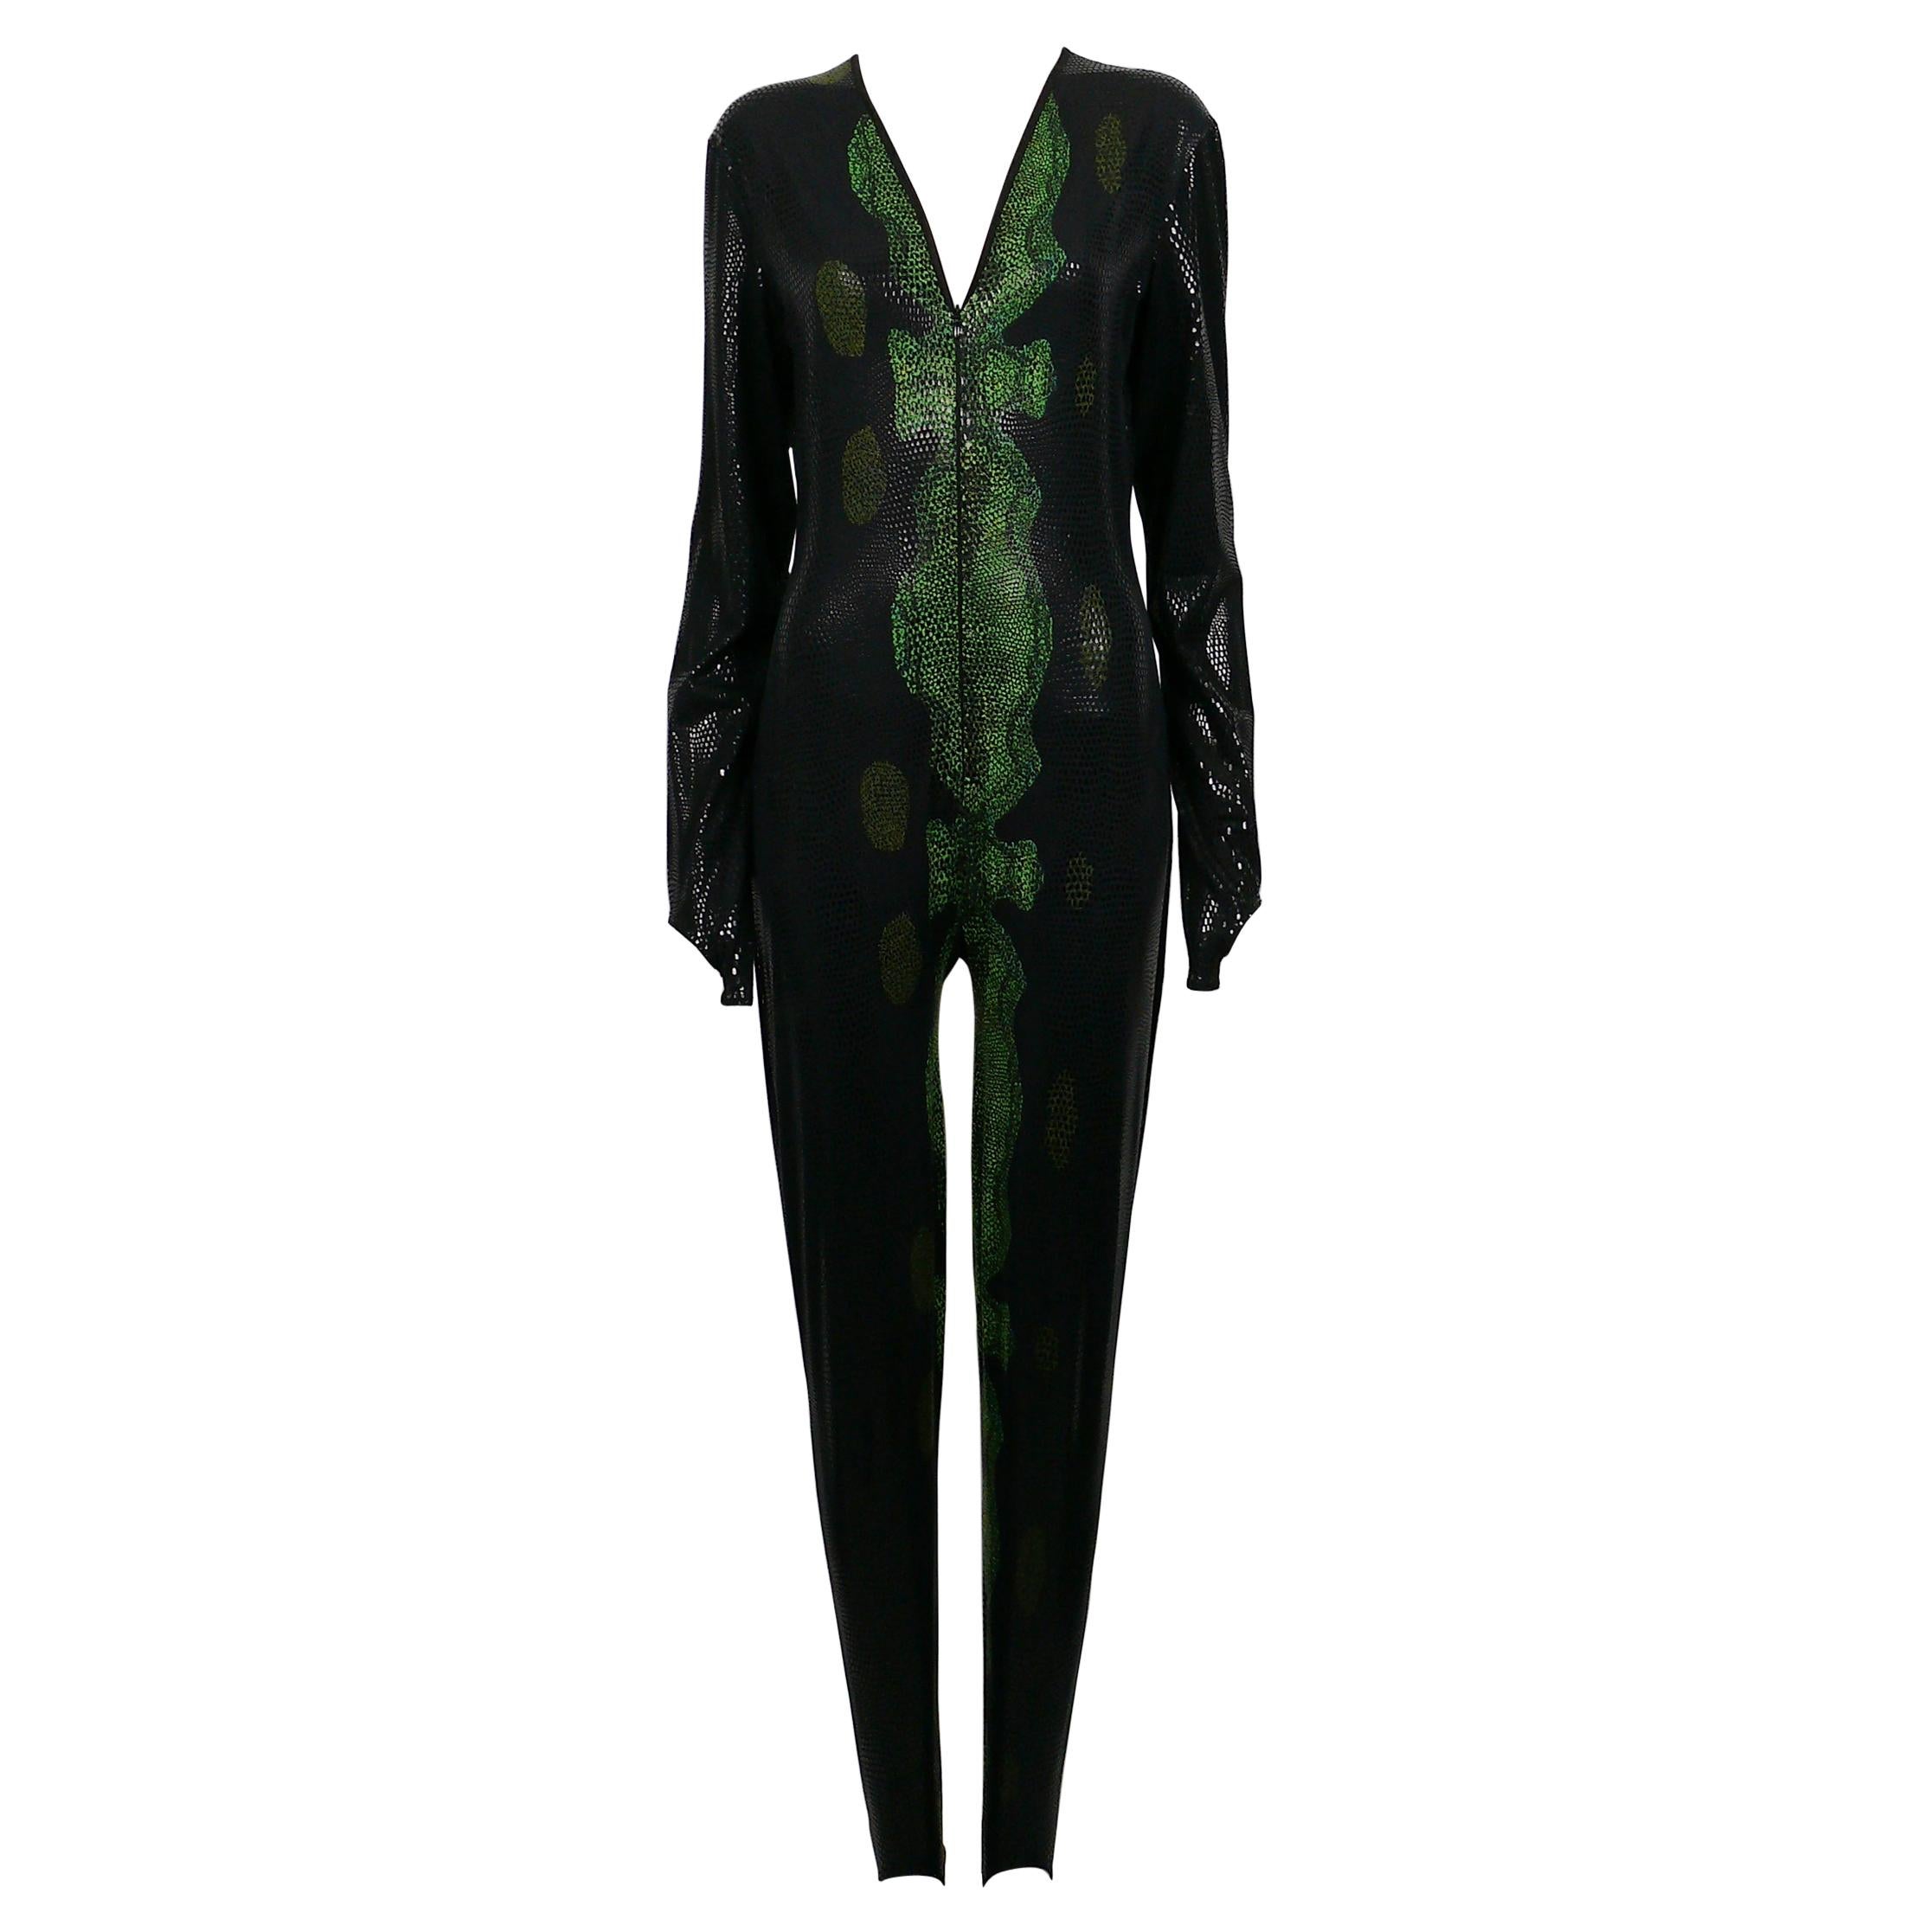 Thierry Mugler Vintage Rare 1998 Back and Green Reptile Skin Jumpsuit Size L